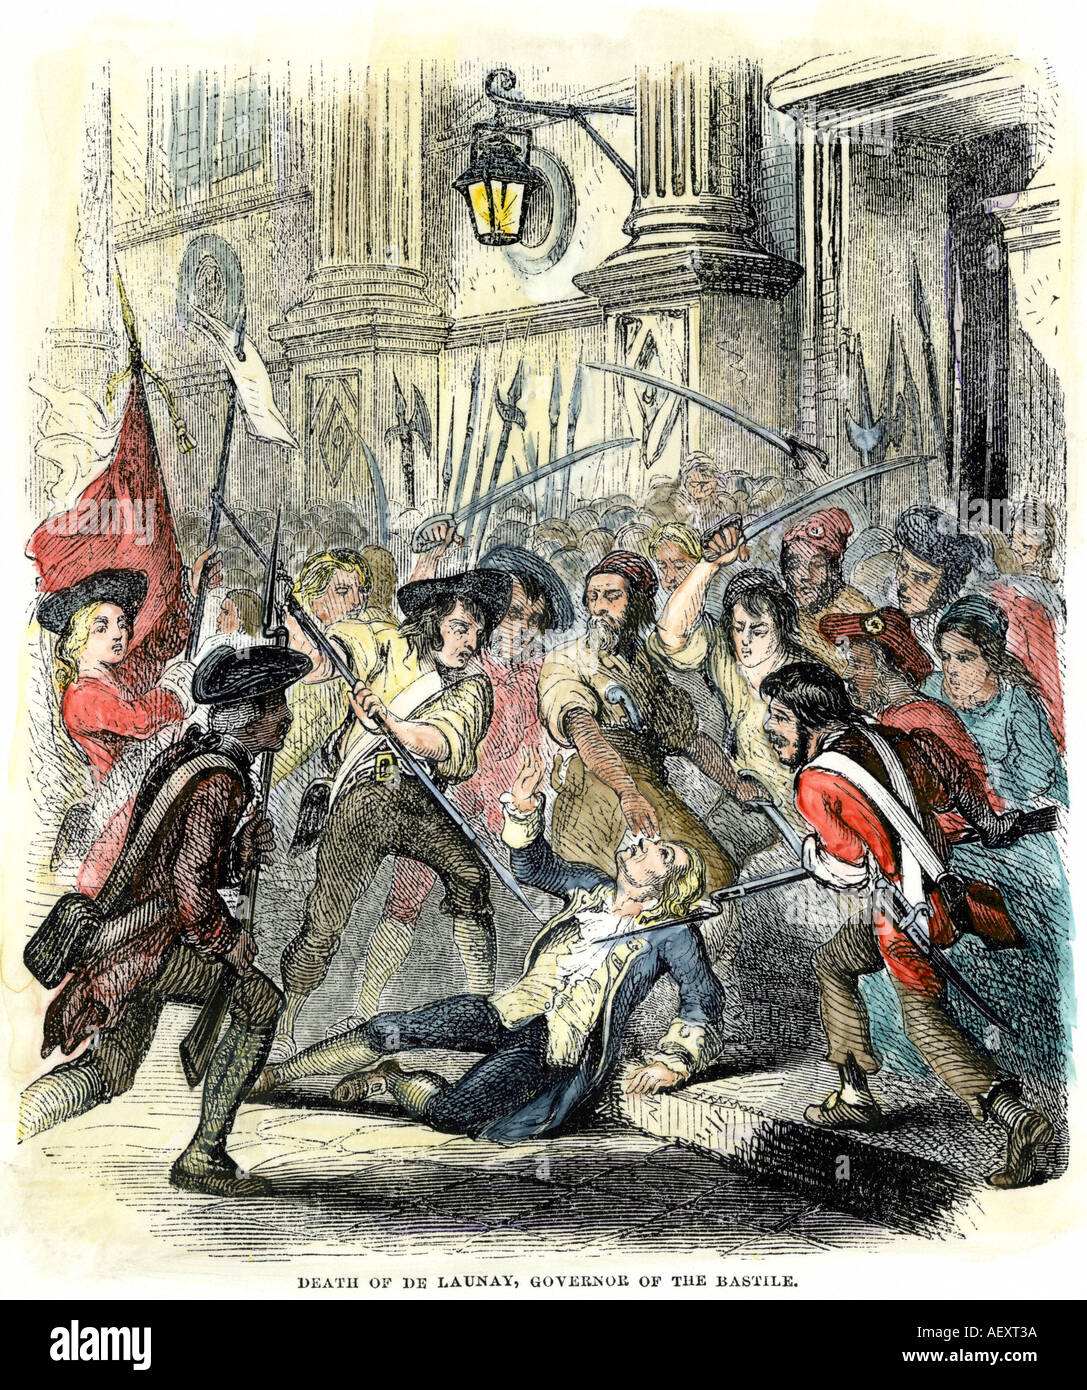 Death of De Launay governor of the Bastille at the hands of a mob in the French Revolution 1789. Hand-colored woodcut Stock Photo